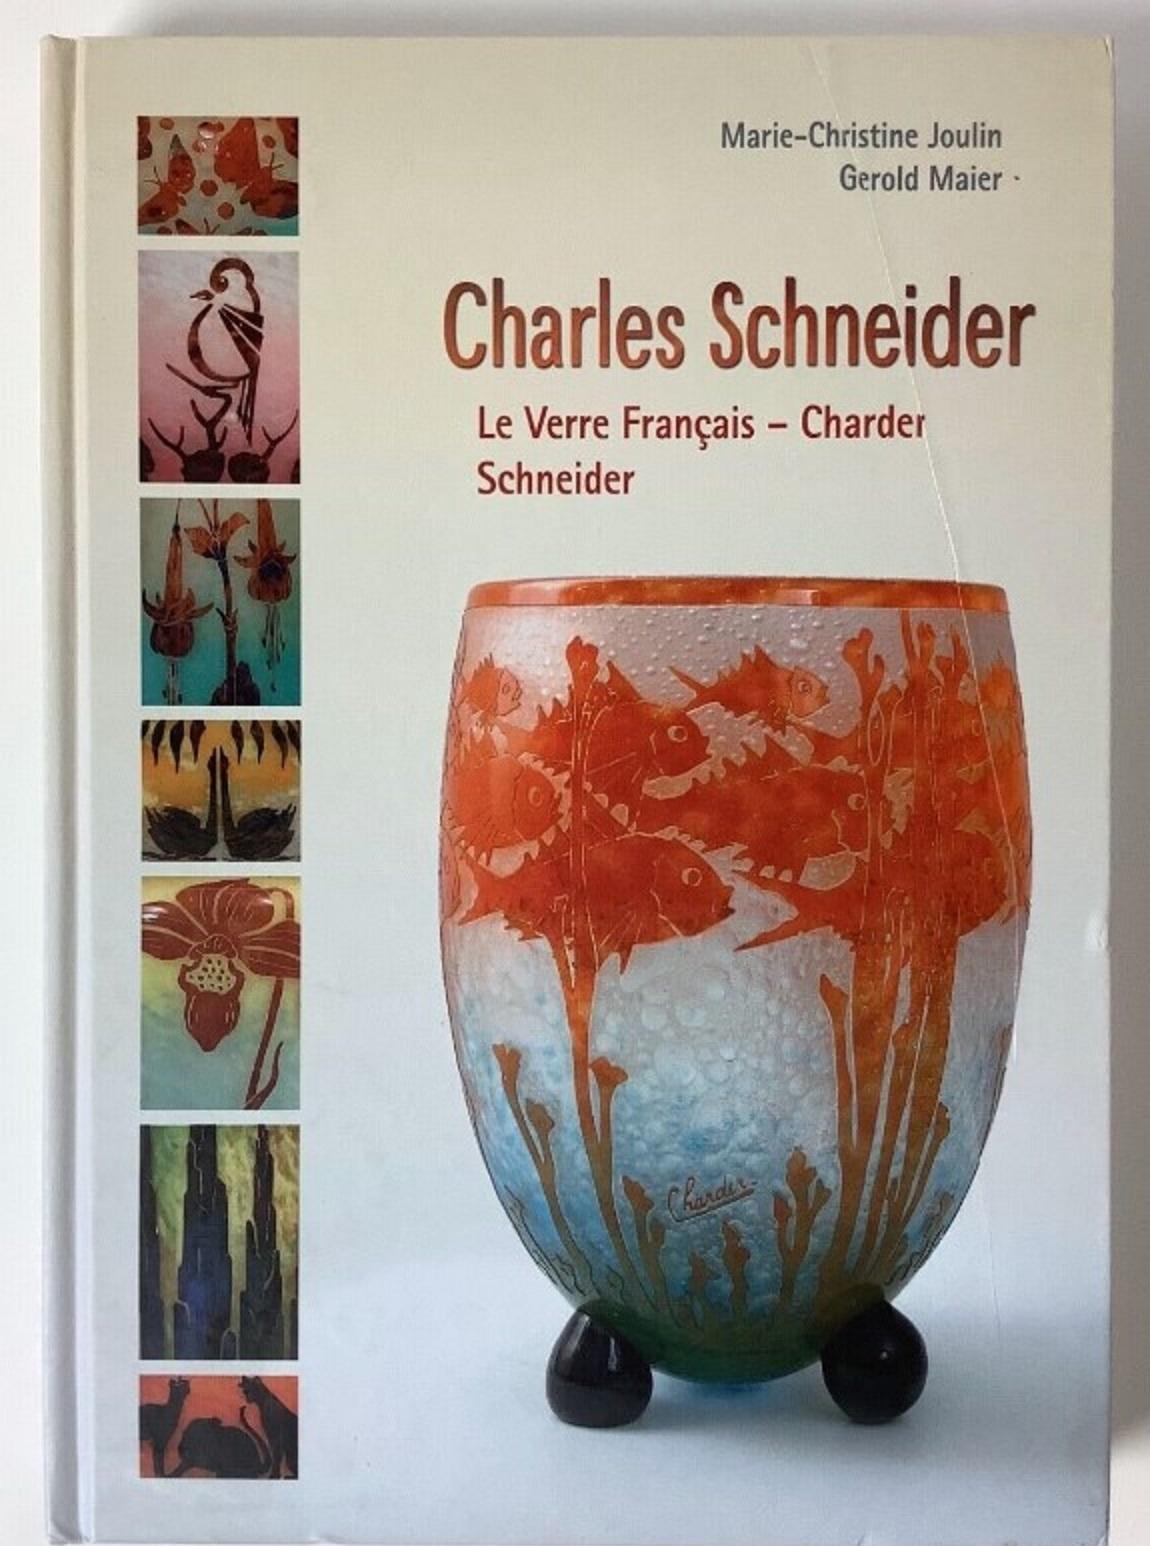 Vase Sign: Le Verre Francais 
Page: 105 book Charles Schneider Le Verre Francais- Charder Schneider
Author: Marie Christine Joulin- Gerold Maier
Page: 166 book Schneider Maître Verrier
Author: Olivier Ador
acid worked
Le Verre cameo glass was a